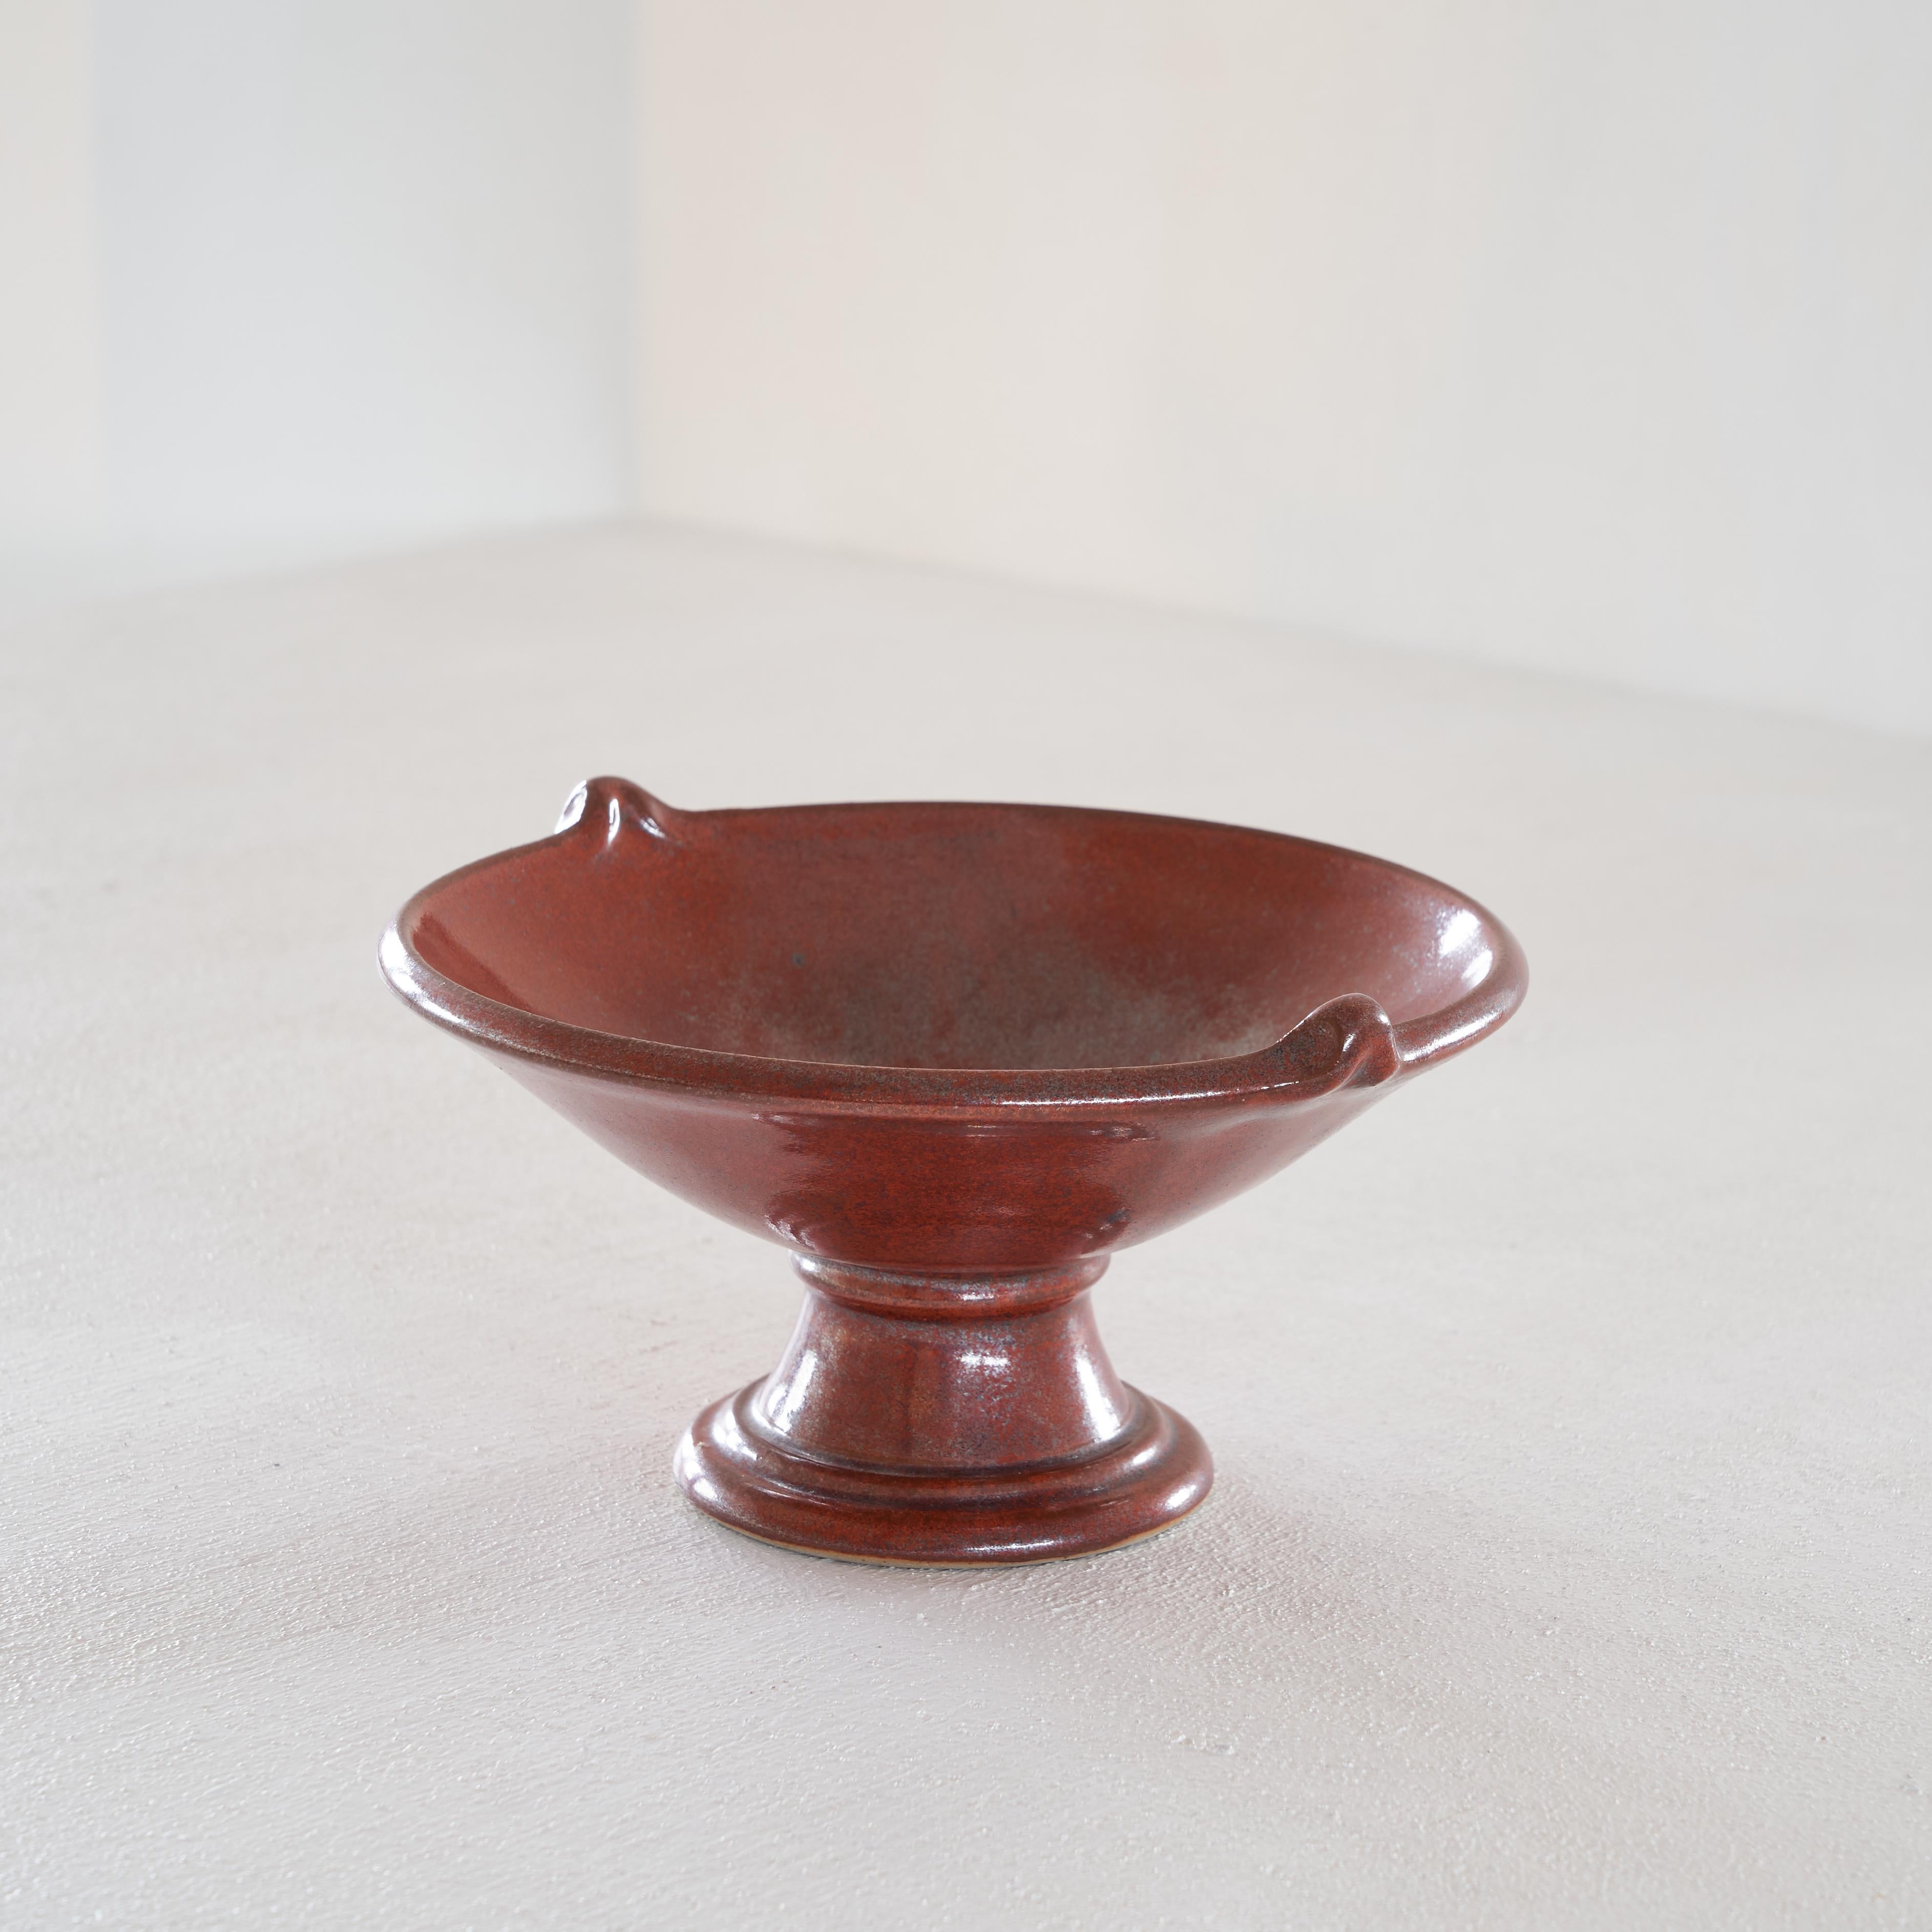 Red and gray speckled ceramic footed bowl

Very decorative and fun footed bowl in red and gray speckled glaze. Both the shape and the glaze are special. The classical footed design is complimented by the two joyful little sculpted handles and the